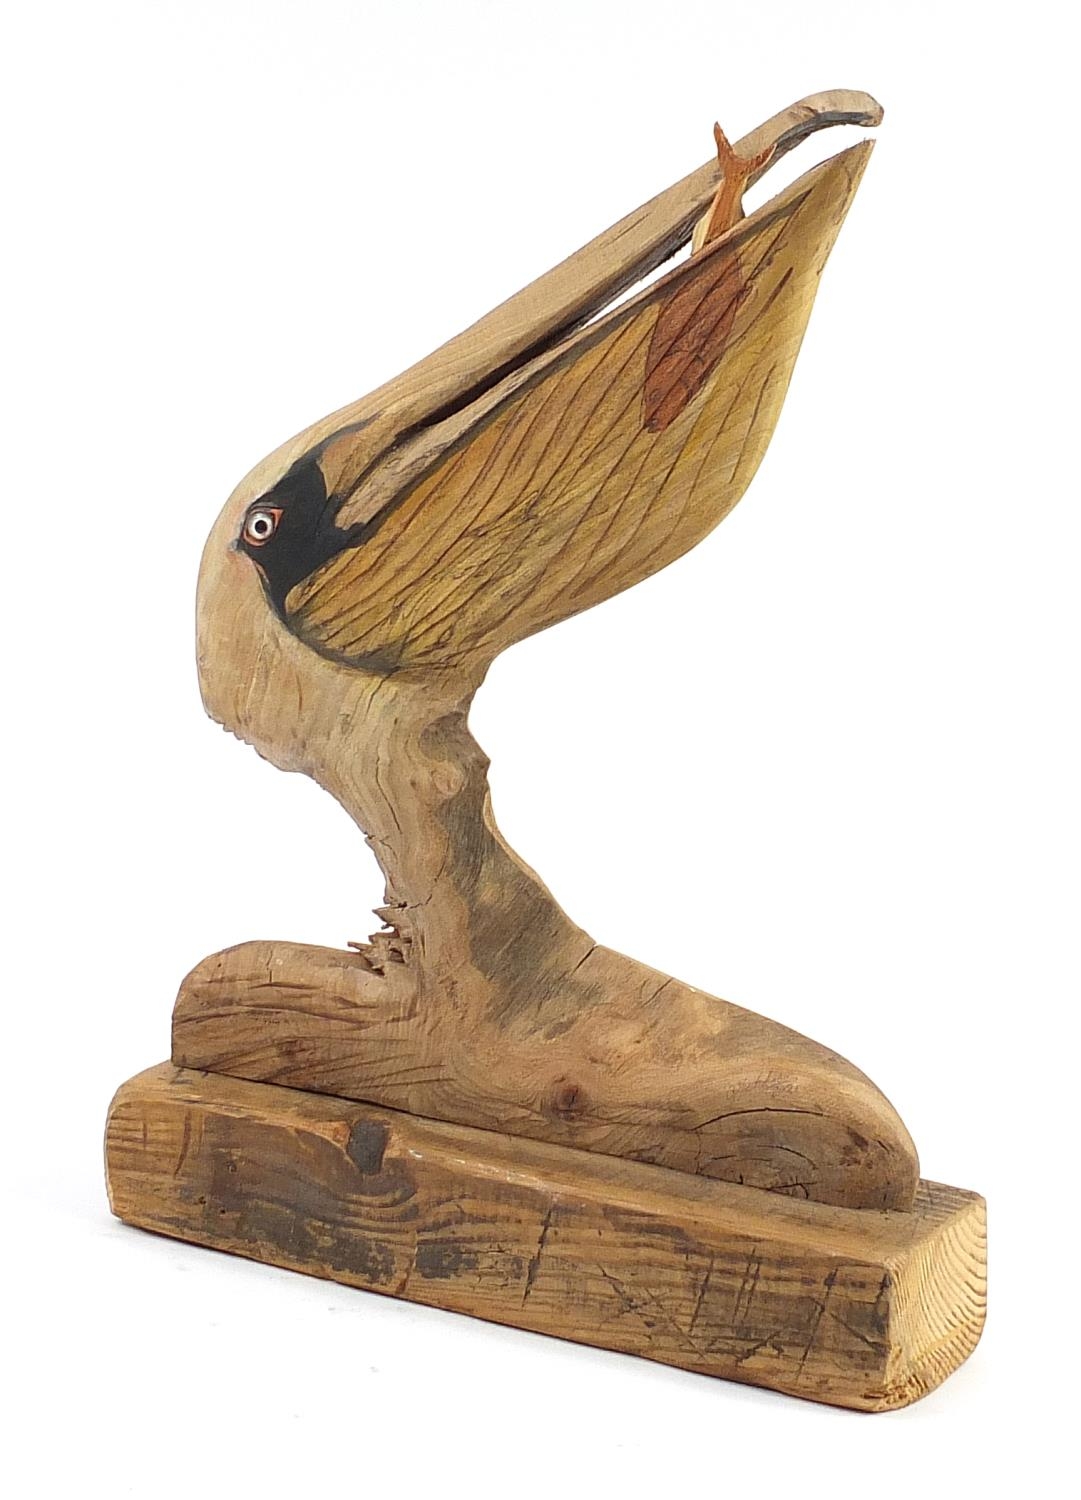 Clive Fredriksson 2021, driftwood carving of a stylised pelican with fish, 61cm high